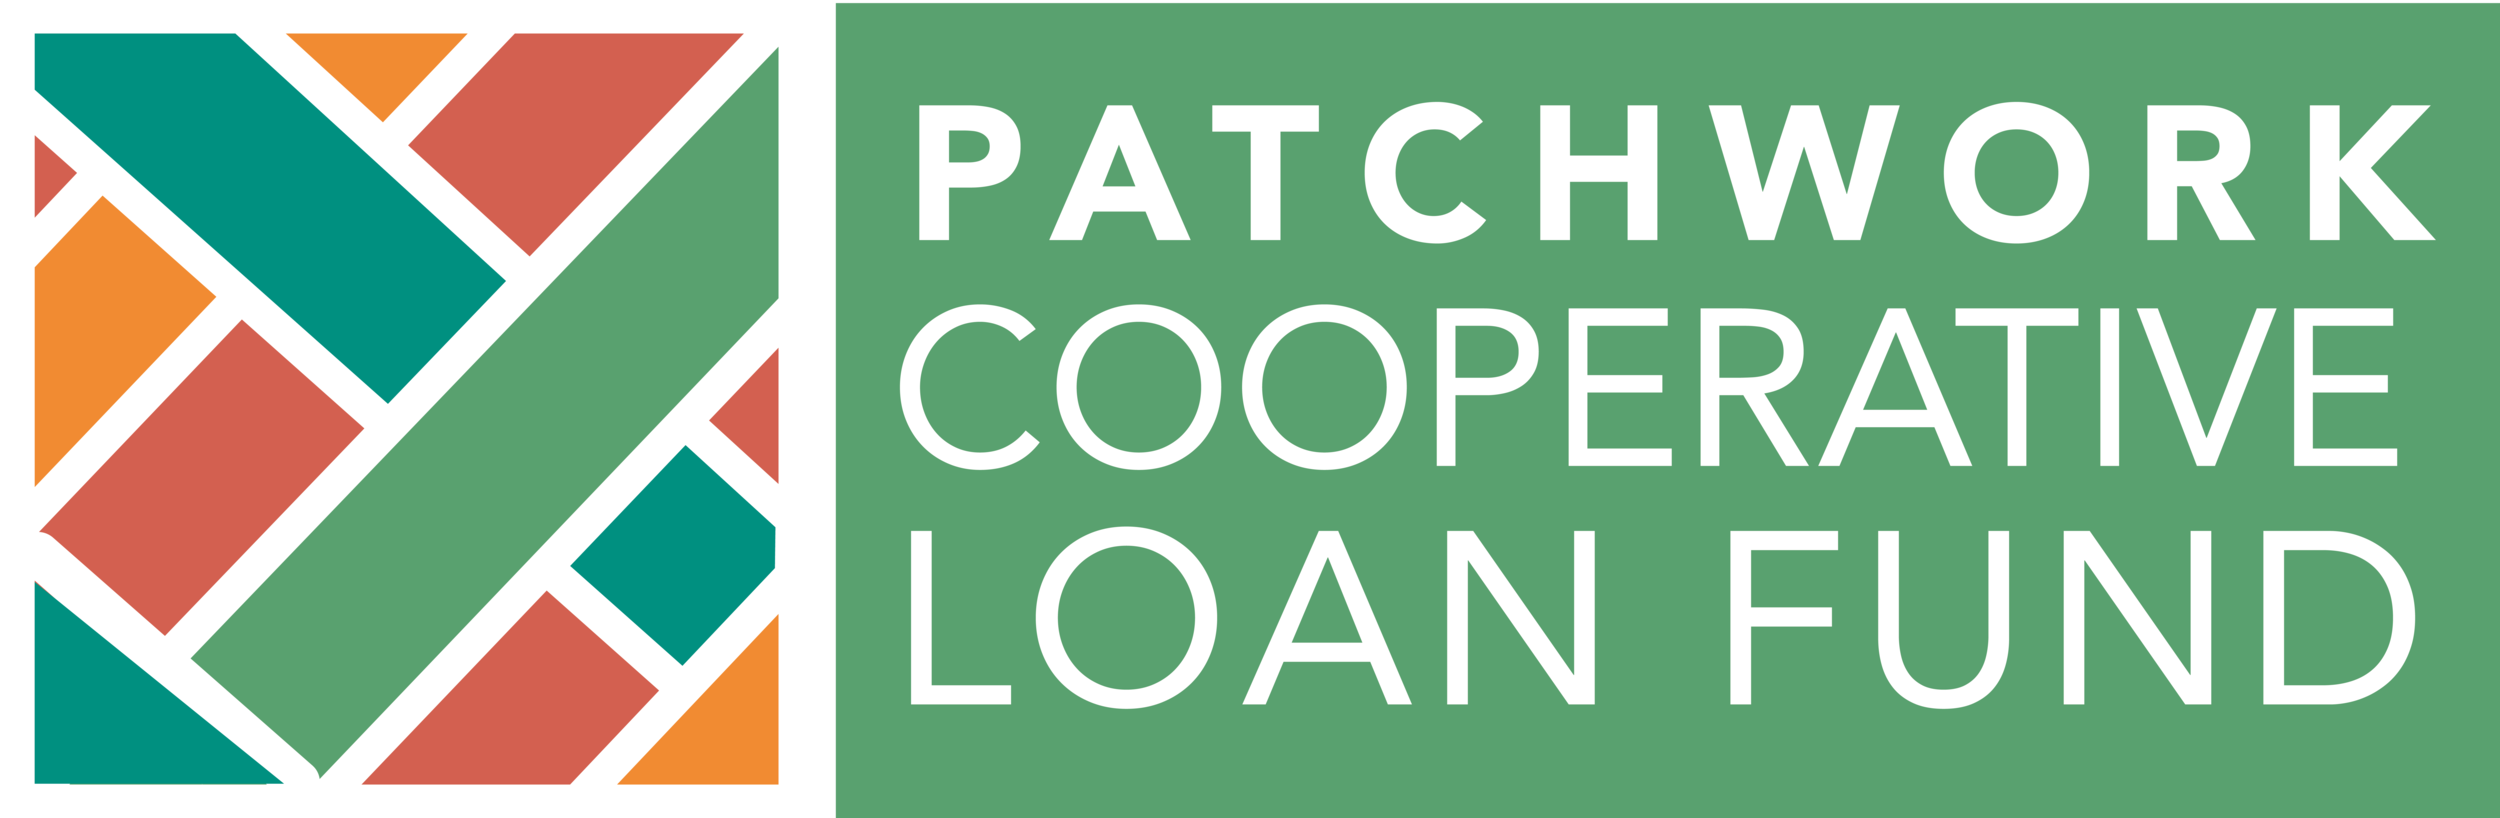 Patchwork Cooperative Loan Fund